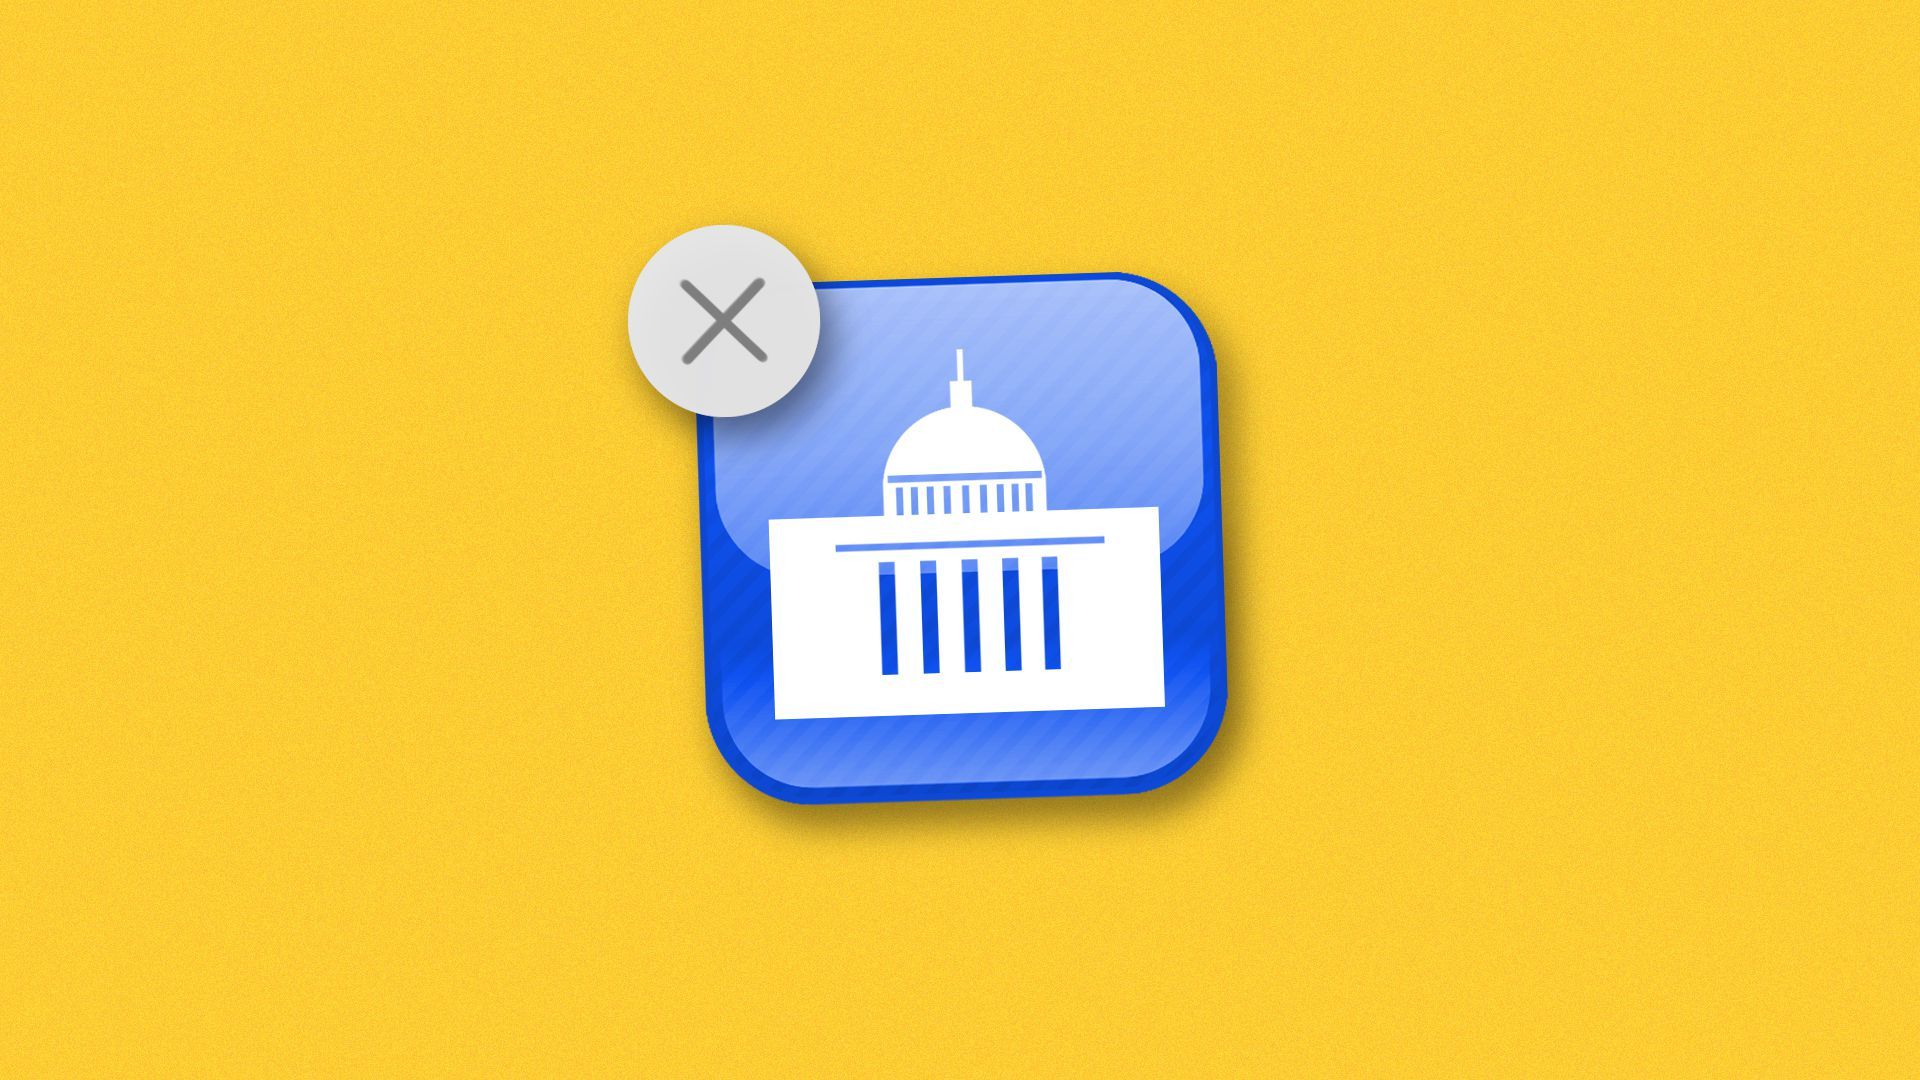 Illustration of an app icon with the U.S. Capitol building, with an "x" button in the top left corner.